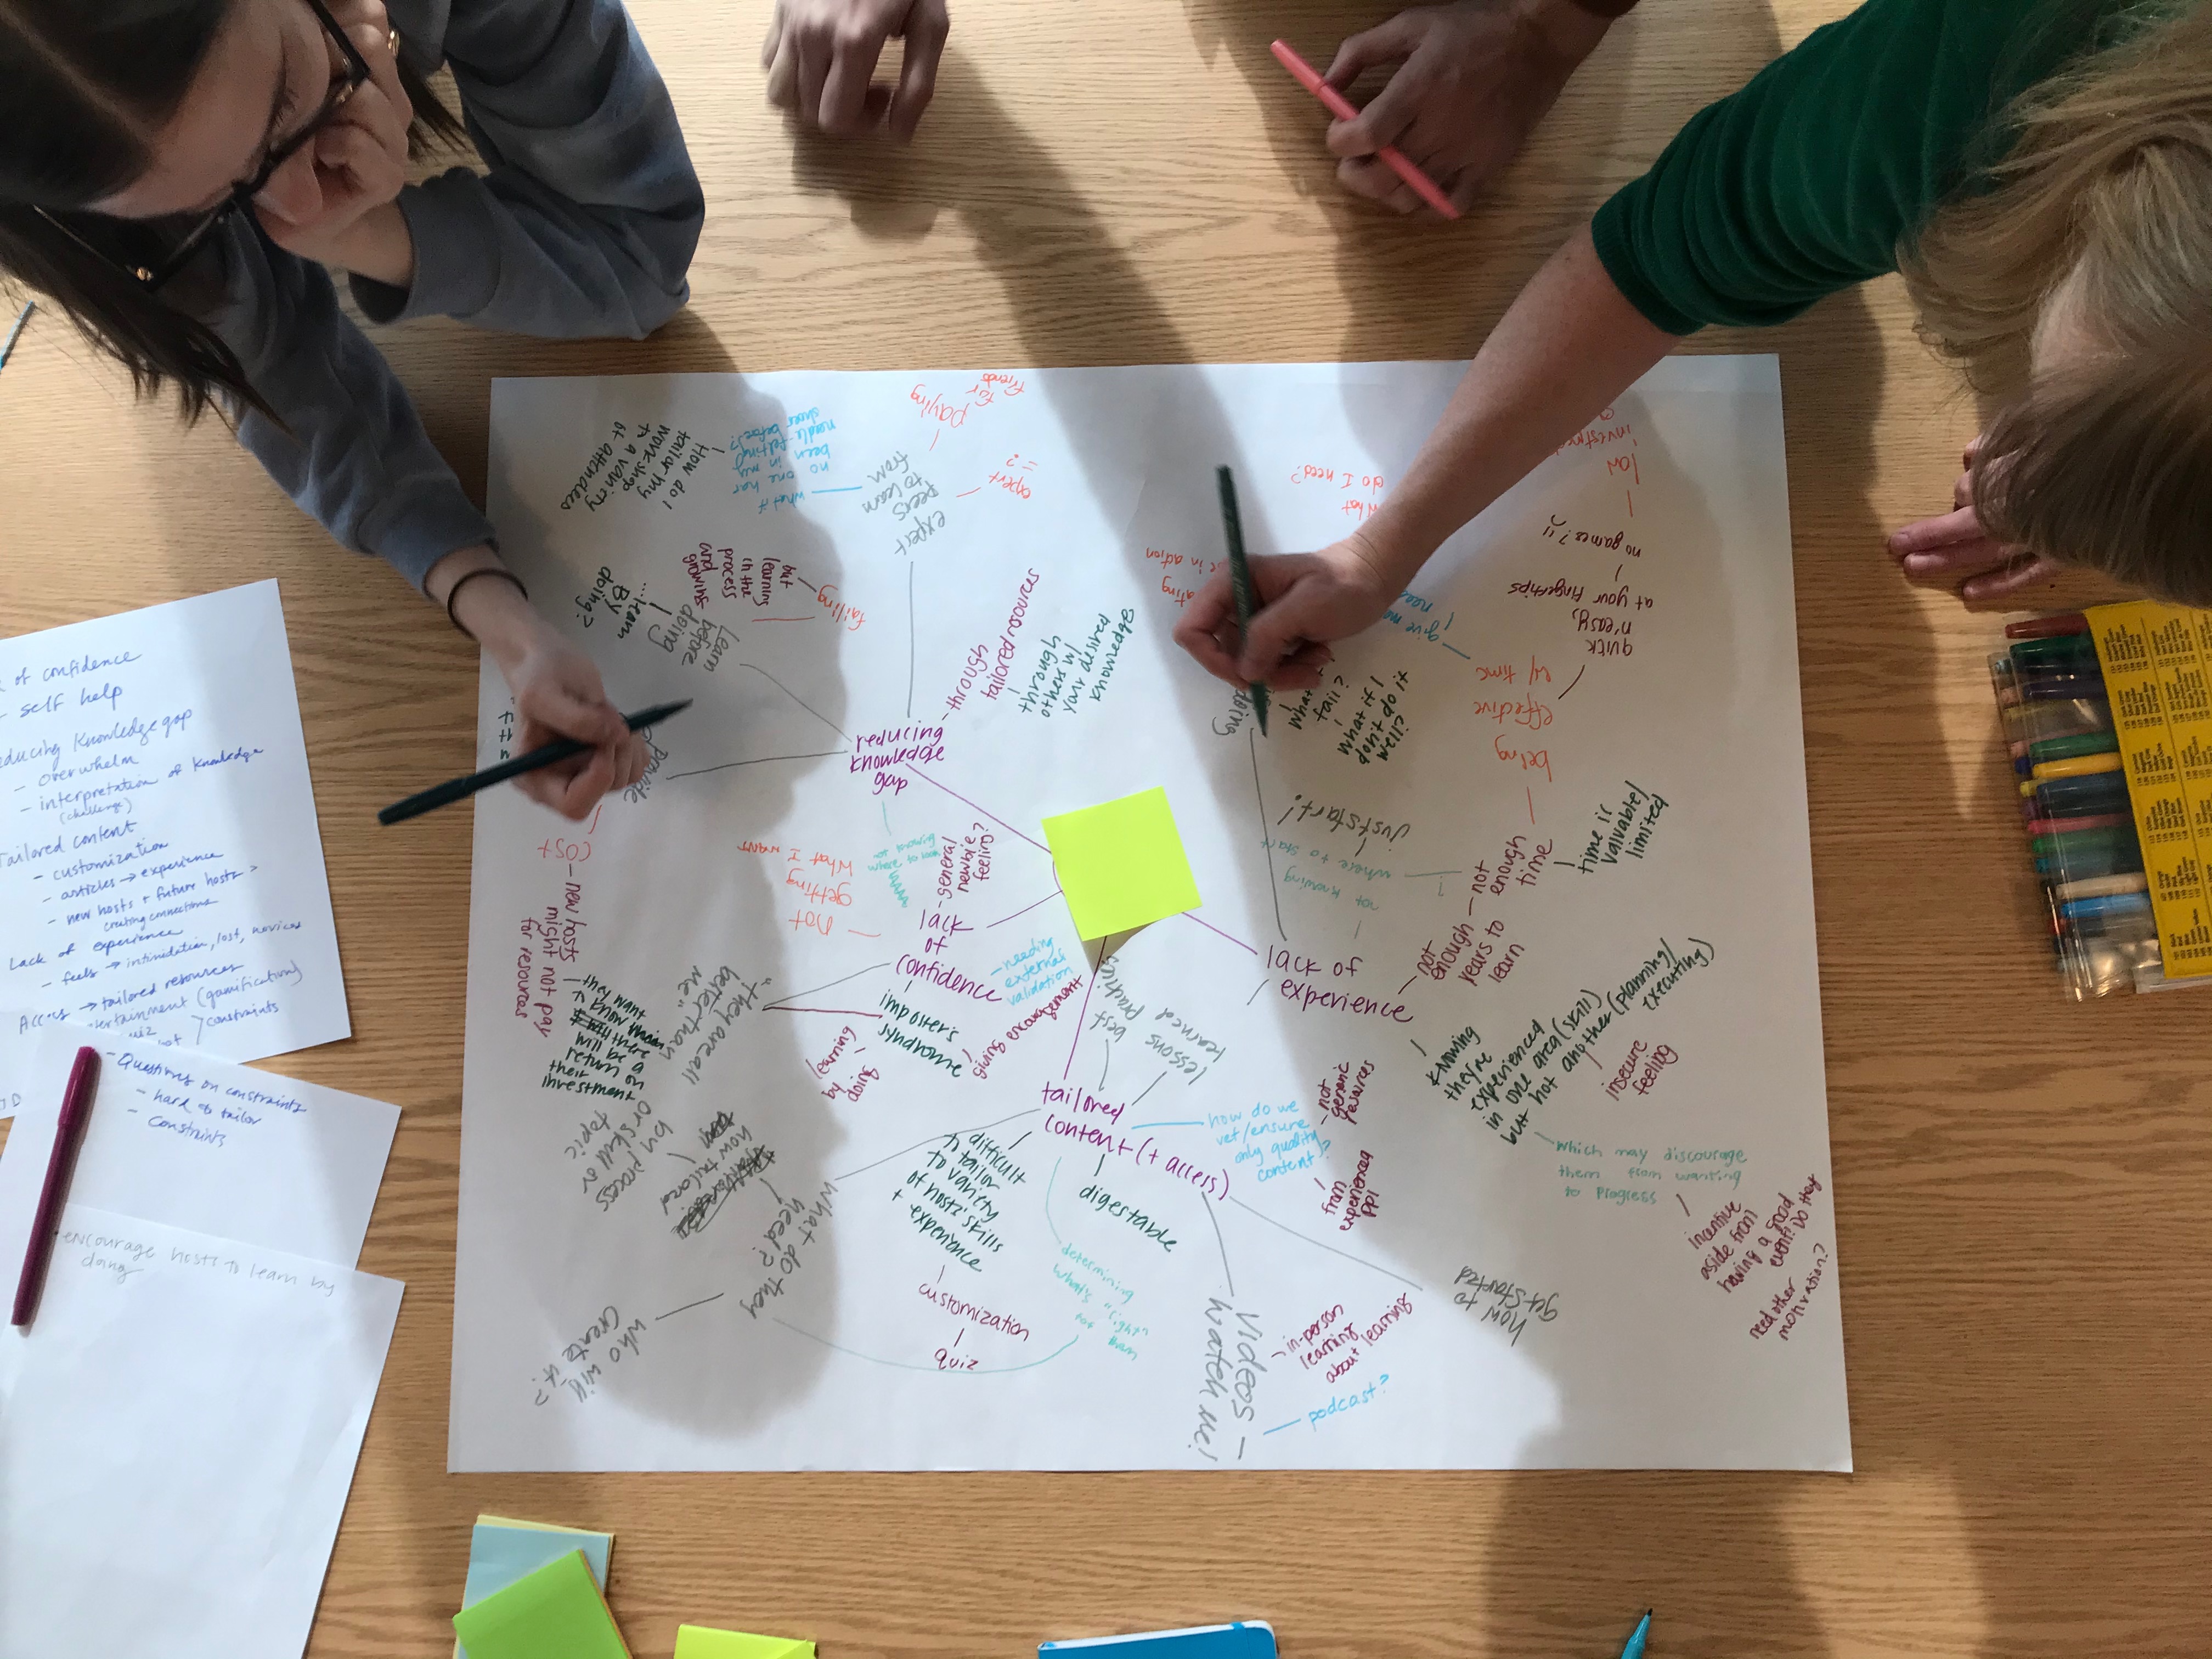 Bird's eye image of the team writing on a large piece of paper, mindmapping out a problem. The table underneath is covered with post-it notes, papers and markers.